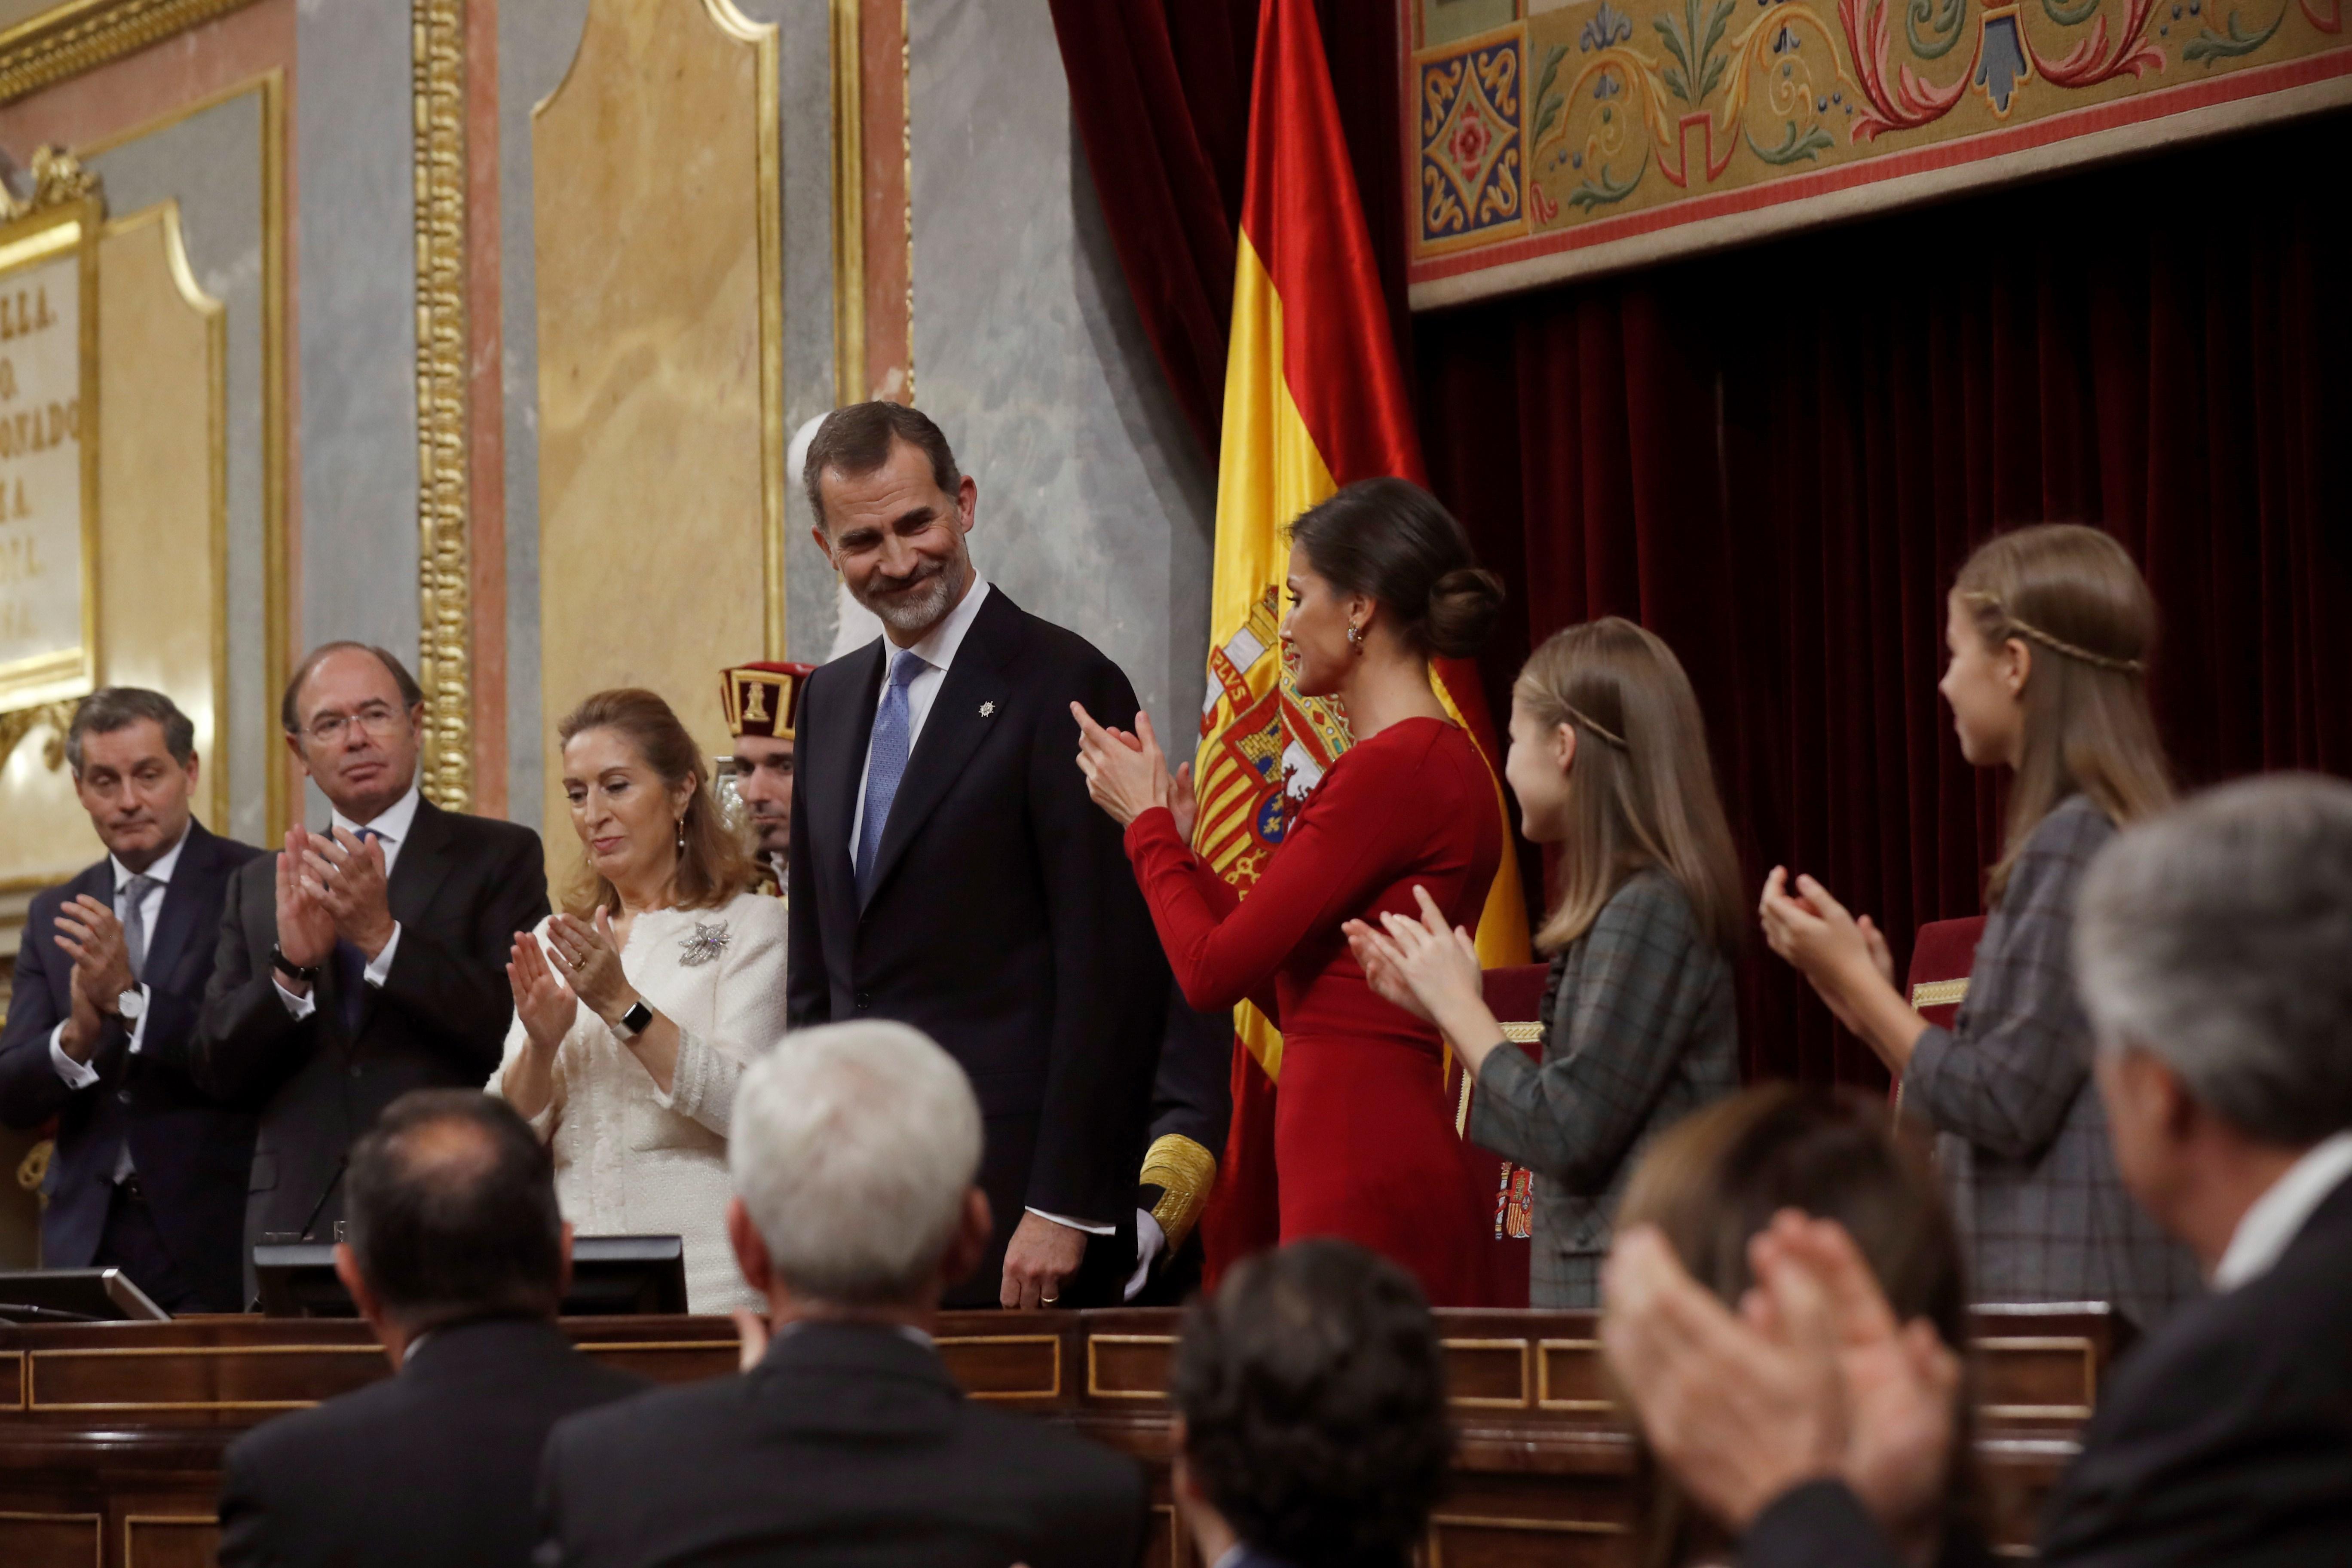 King Felipe VI maintains his confrontational tone with the independence movement